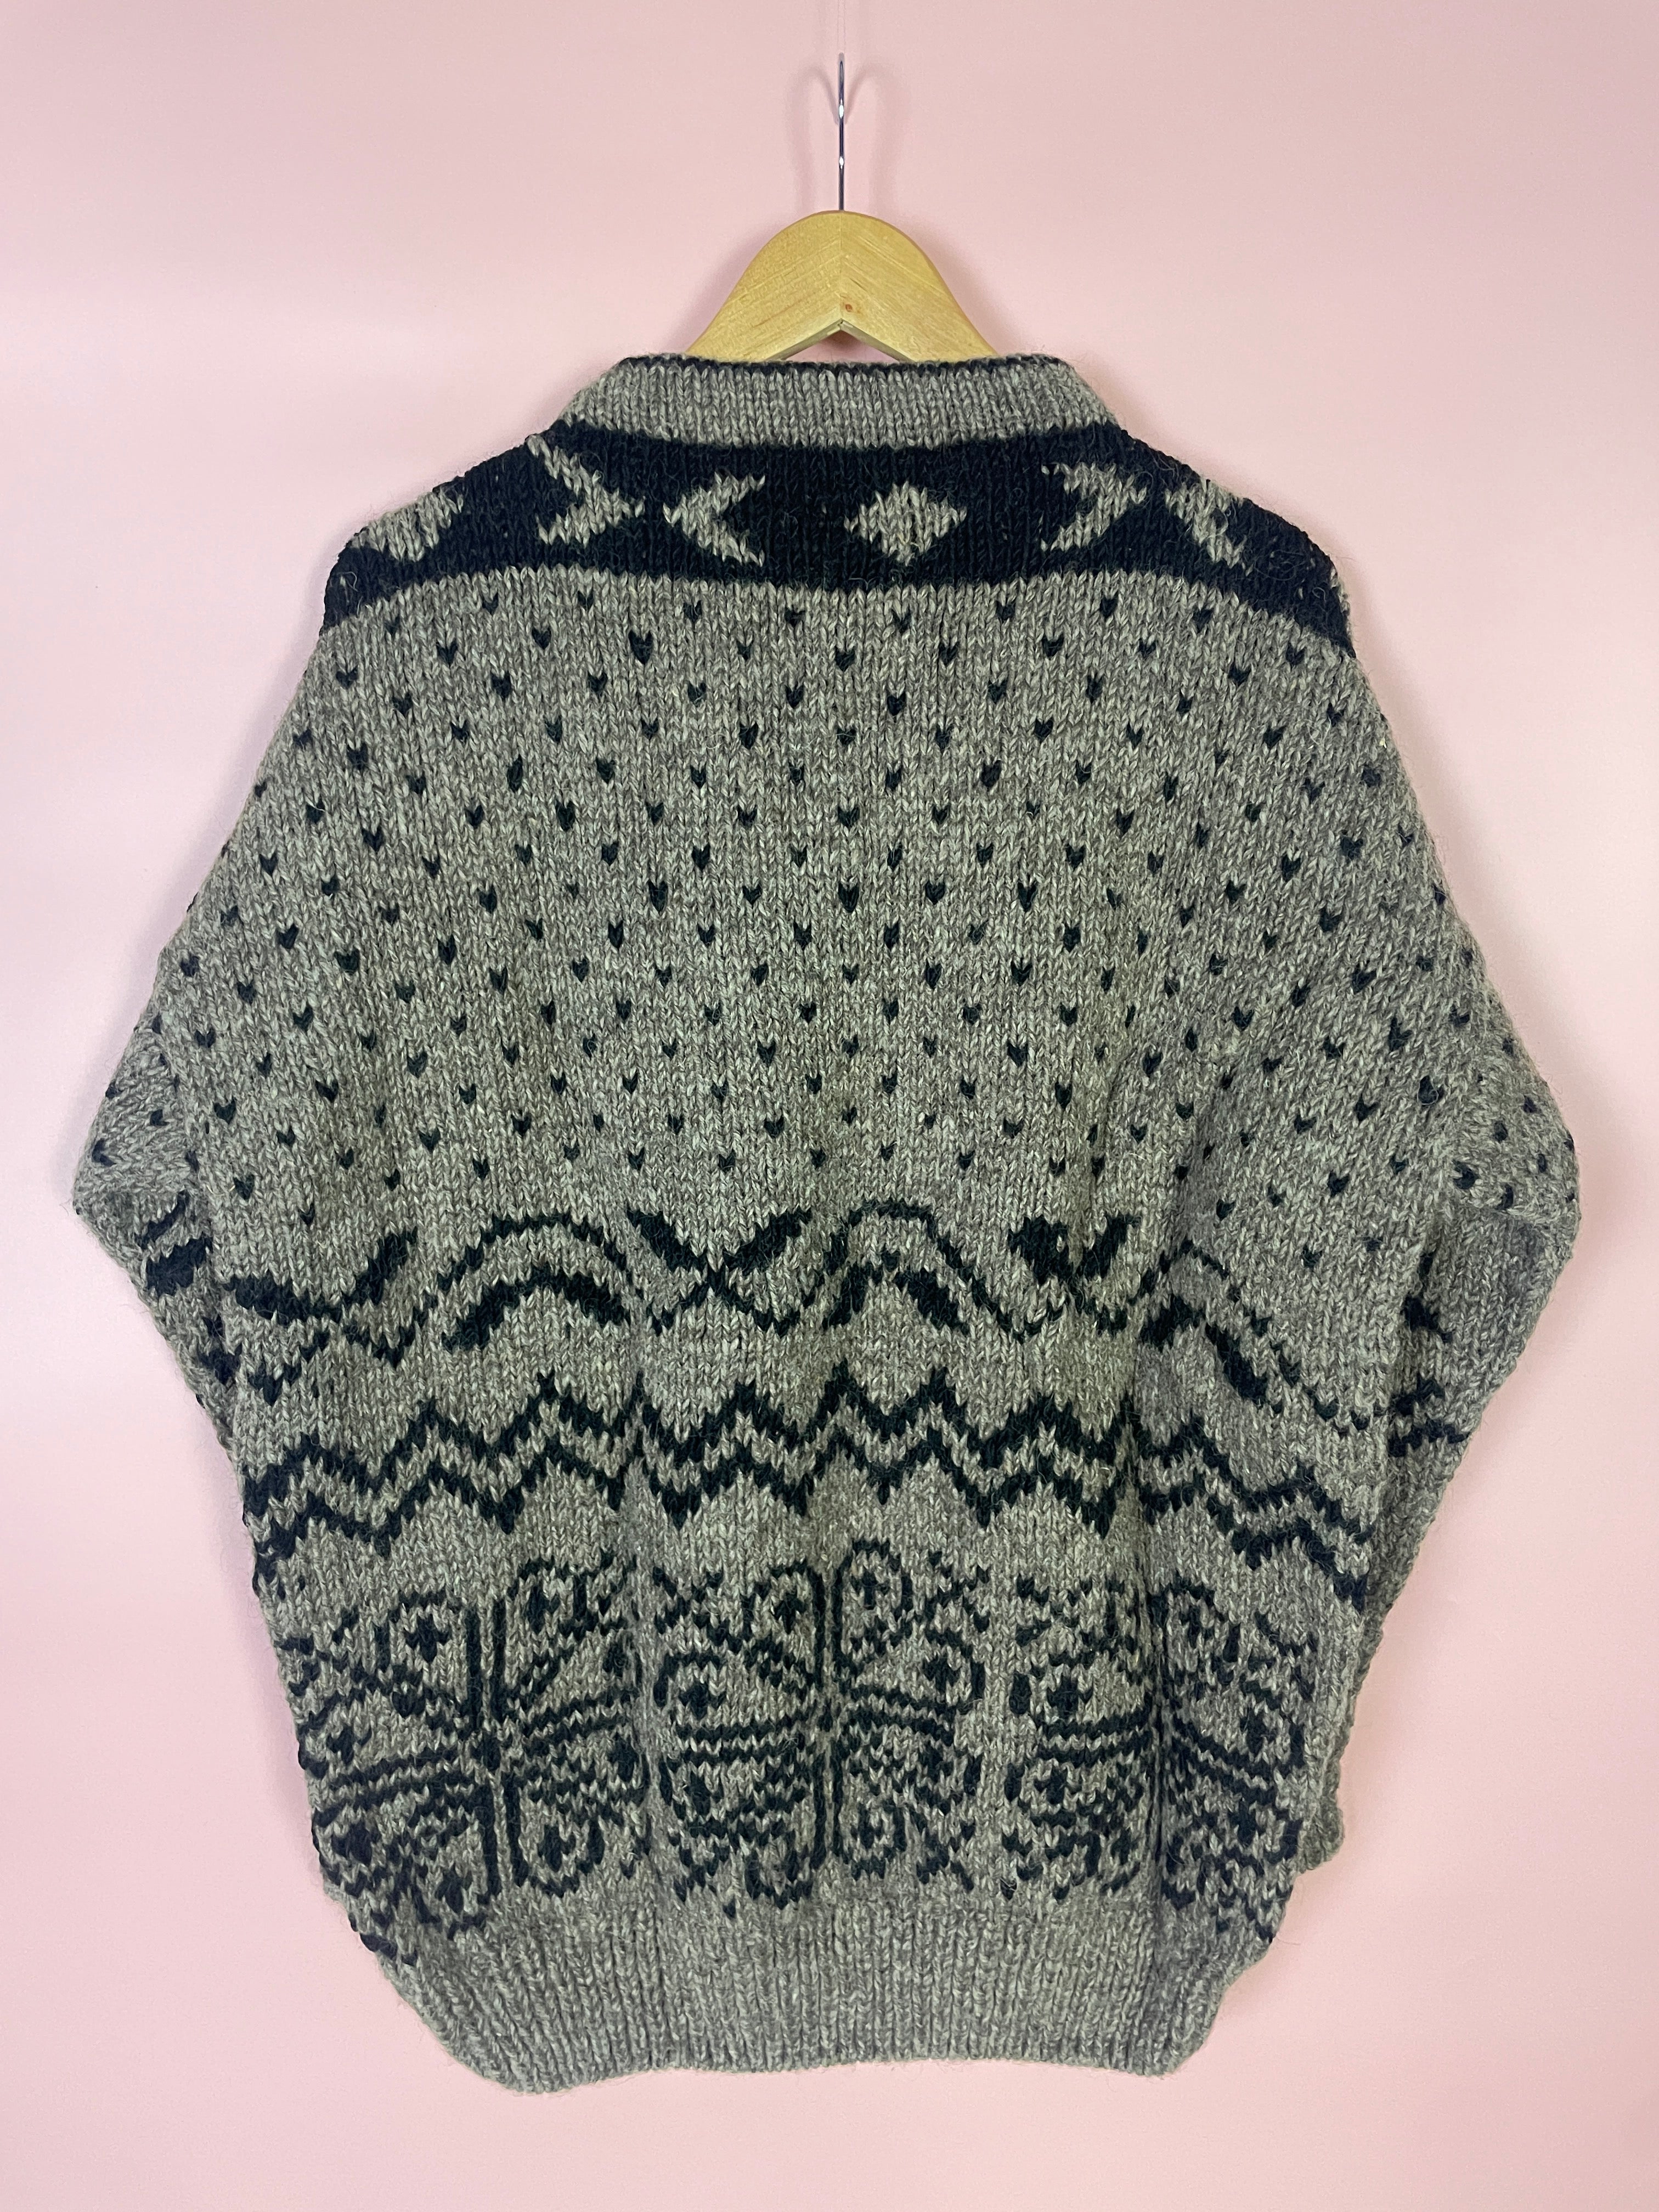 L 100% Wolle Pullover Boho